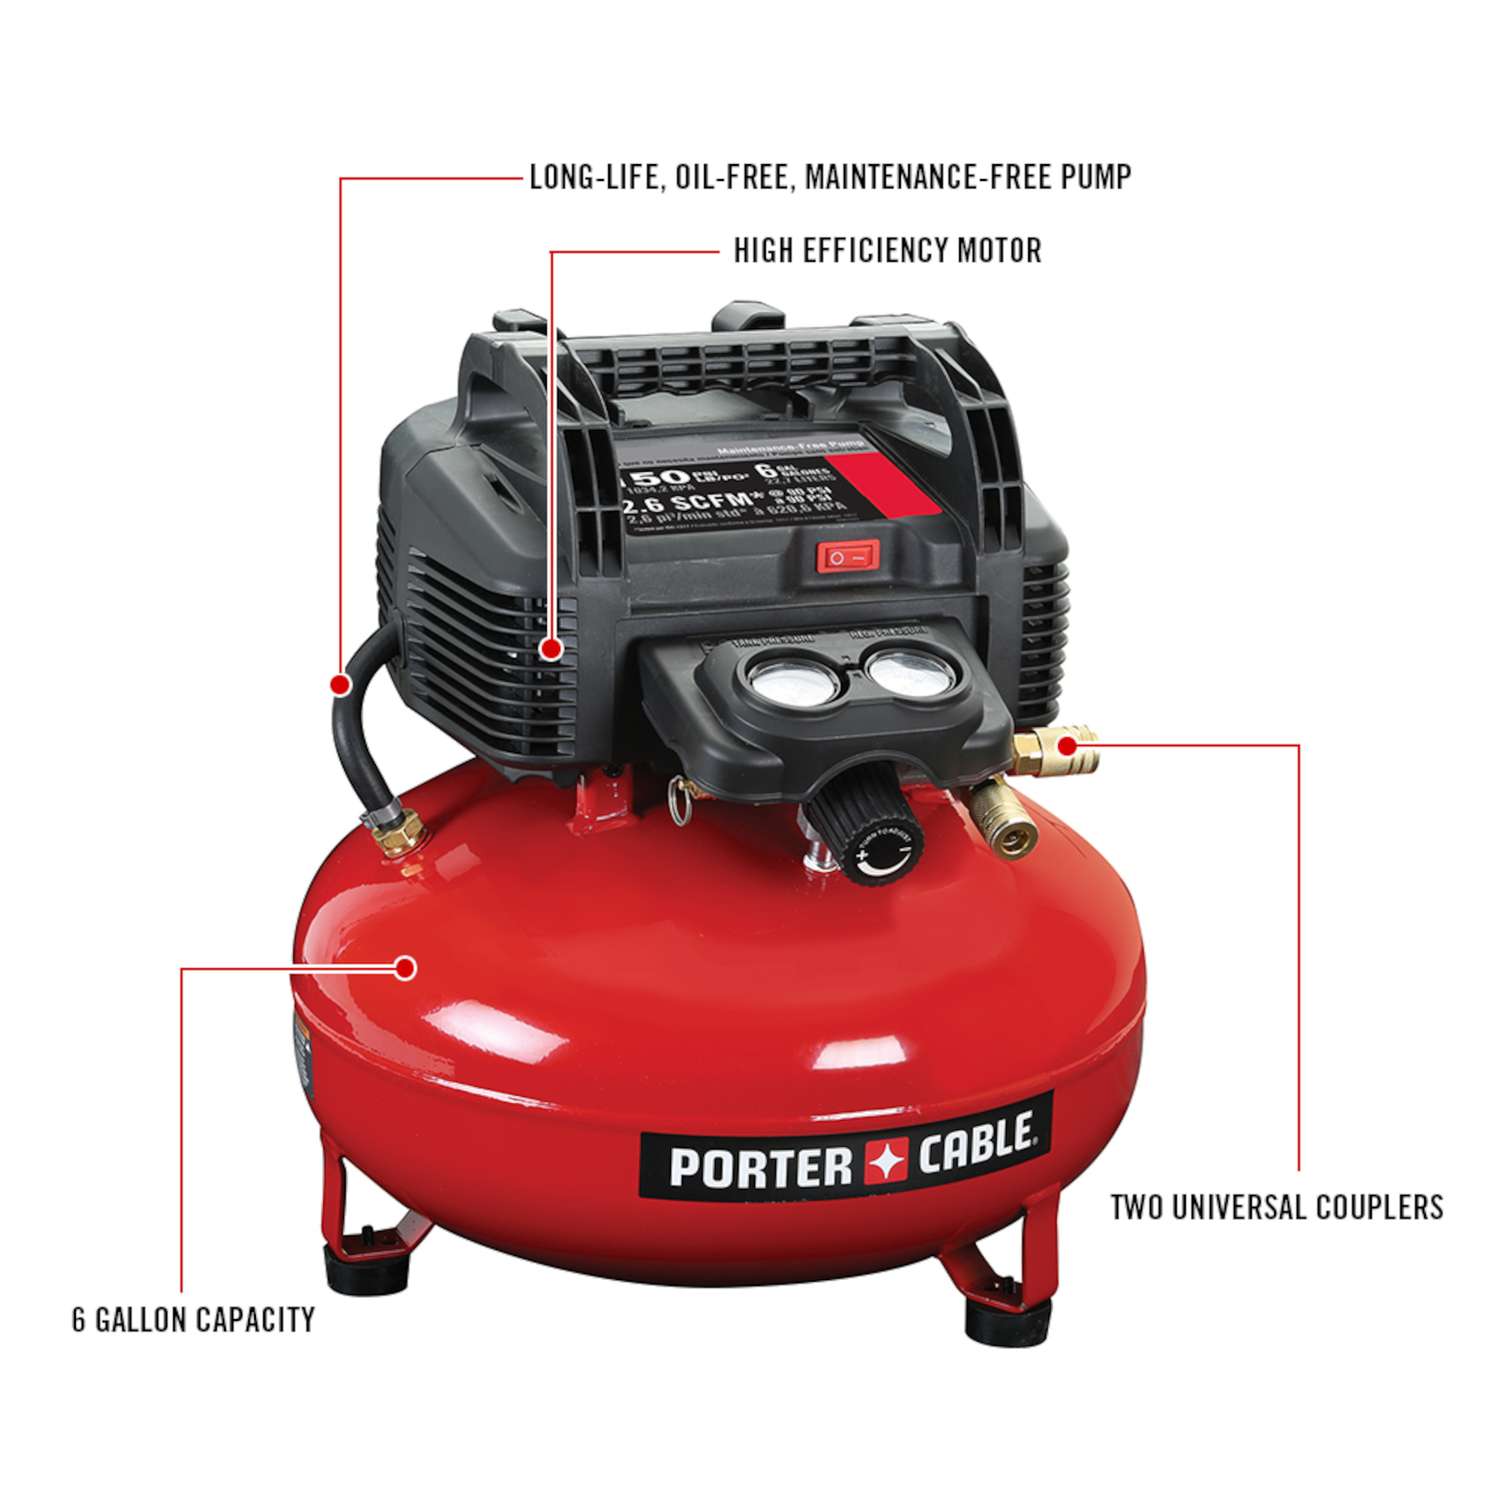 Porter-cable C2002WK Oil-Free Pancake Compressor with 13-piece Accessory Kit